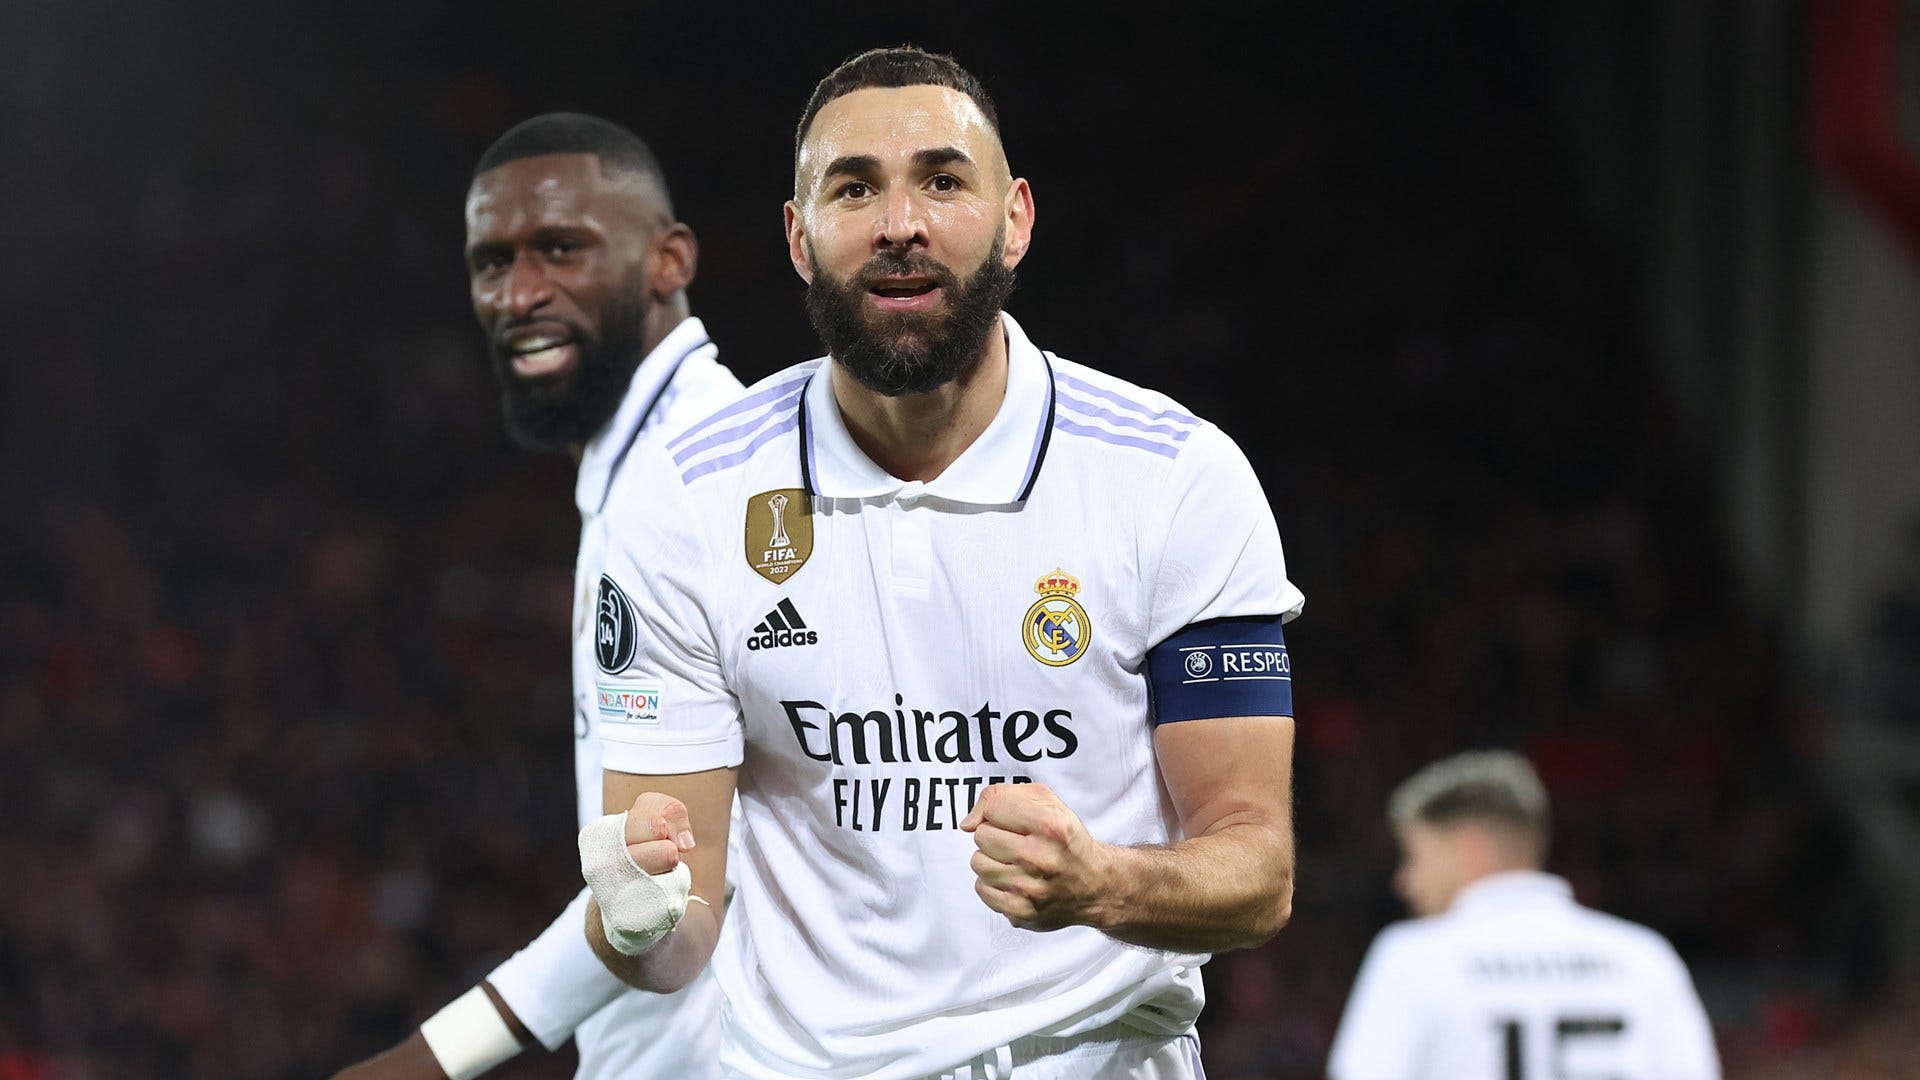 Real Madrid vs Atletico Madrid Live stream, TV channel, kick-off time and where to watch Goal UK